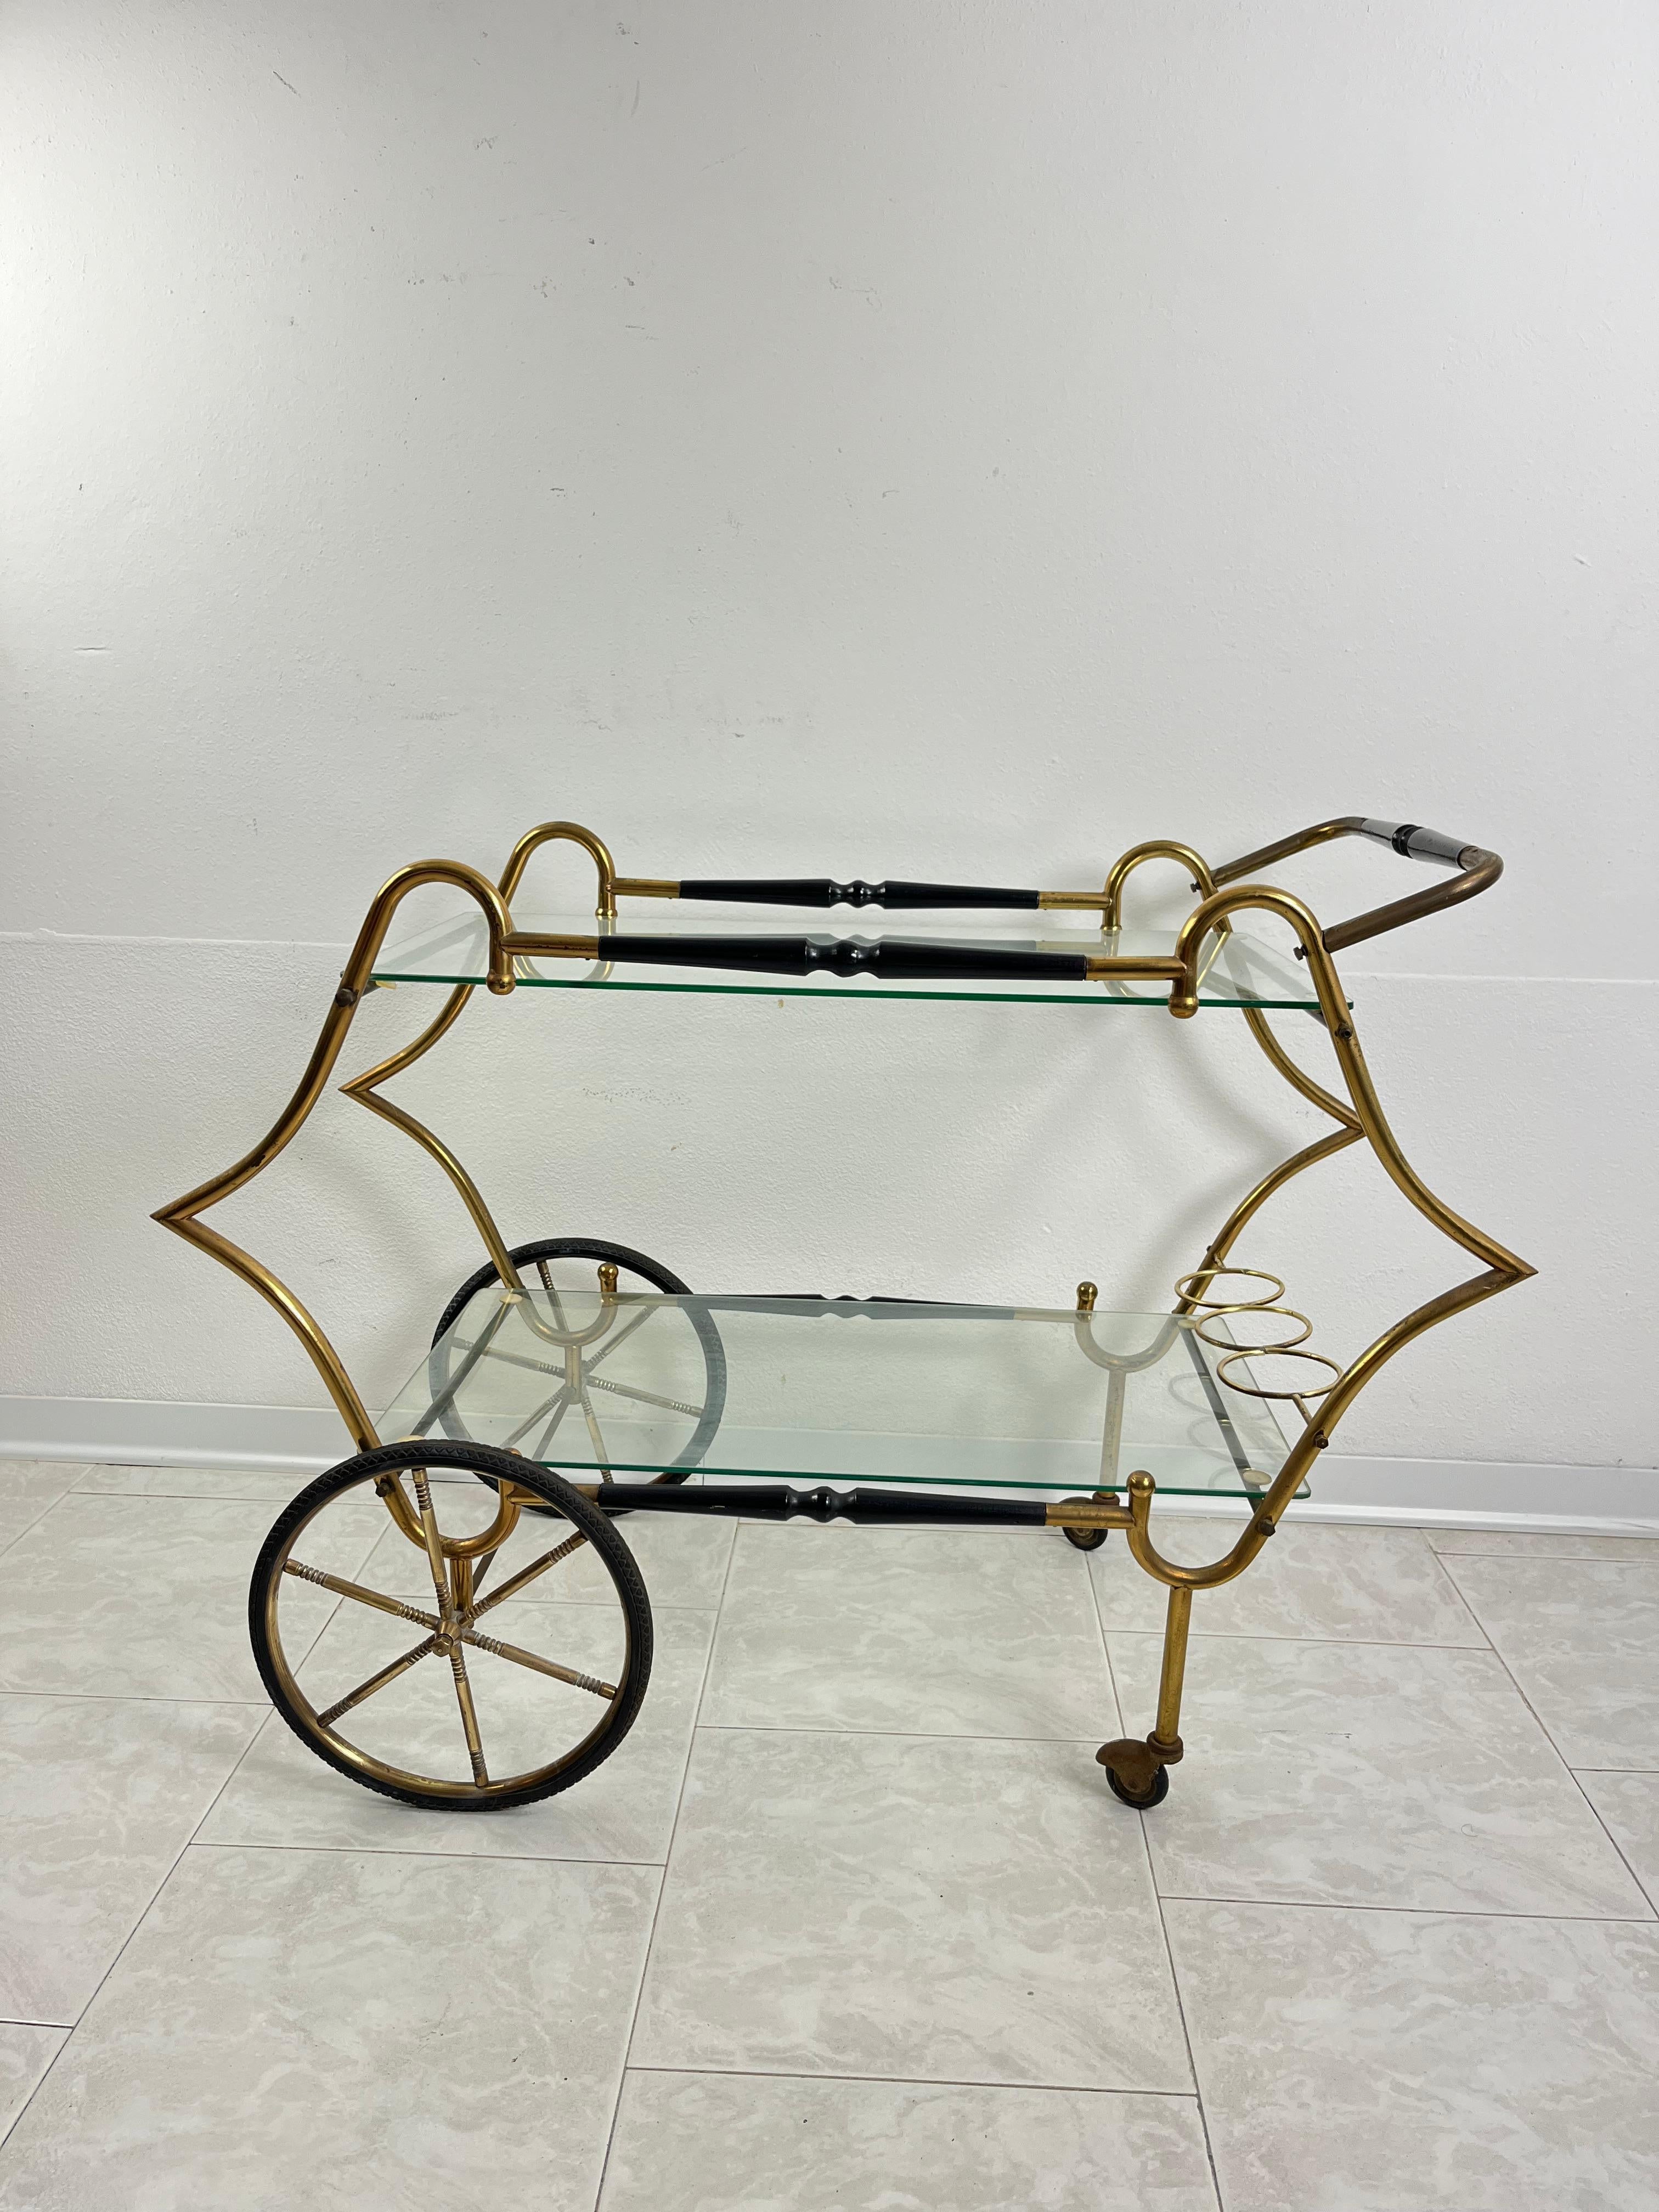 Mid-Century Brass Bar Cart attributed to Aldo Tura 1950s
Glass tops, intact and in good condition.
Found in a noble apartment in my city.